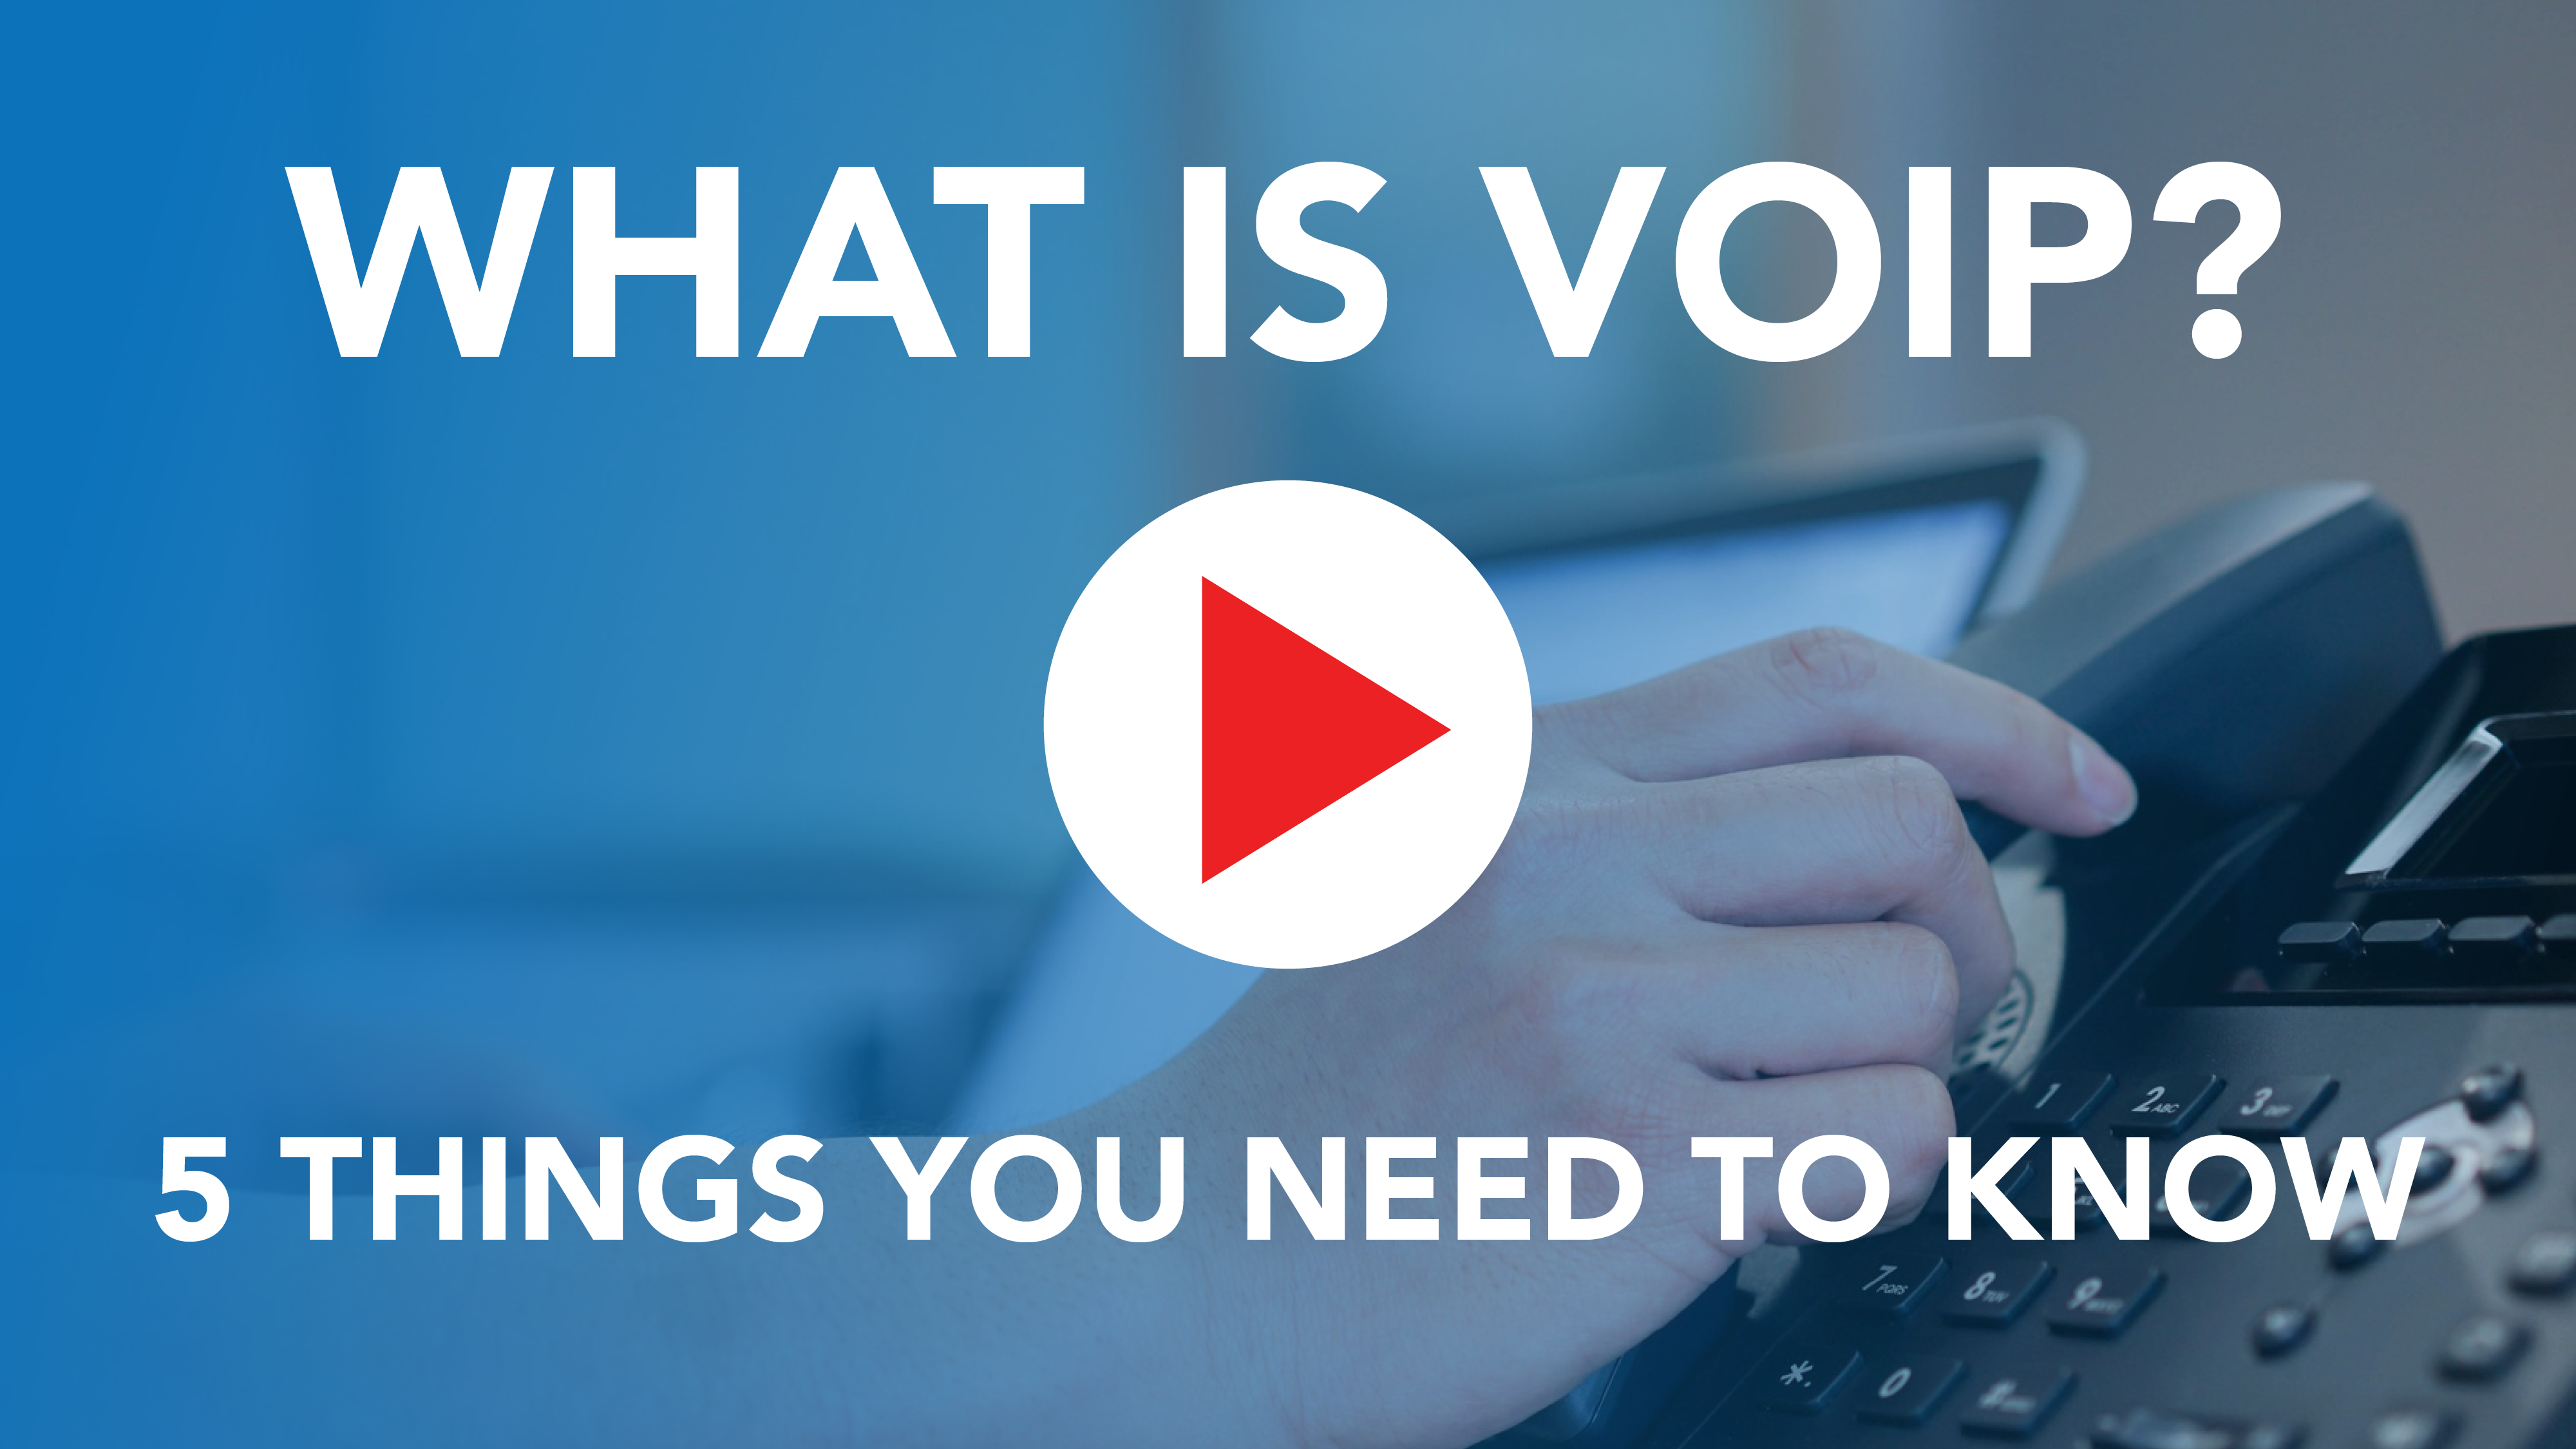 Video Title Card VoIP - What Is VoIP? 5 Things You Need to Know